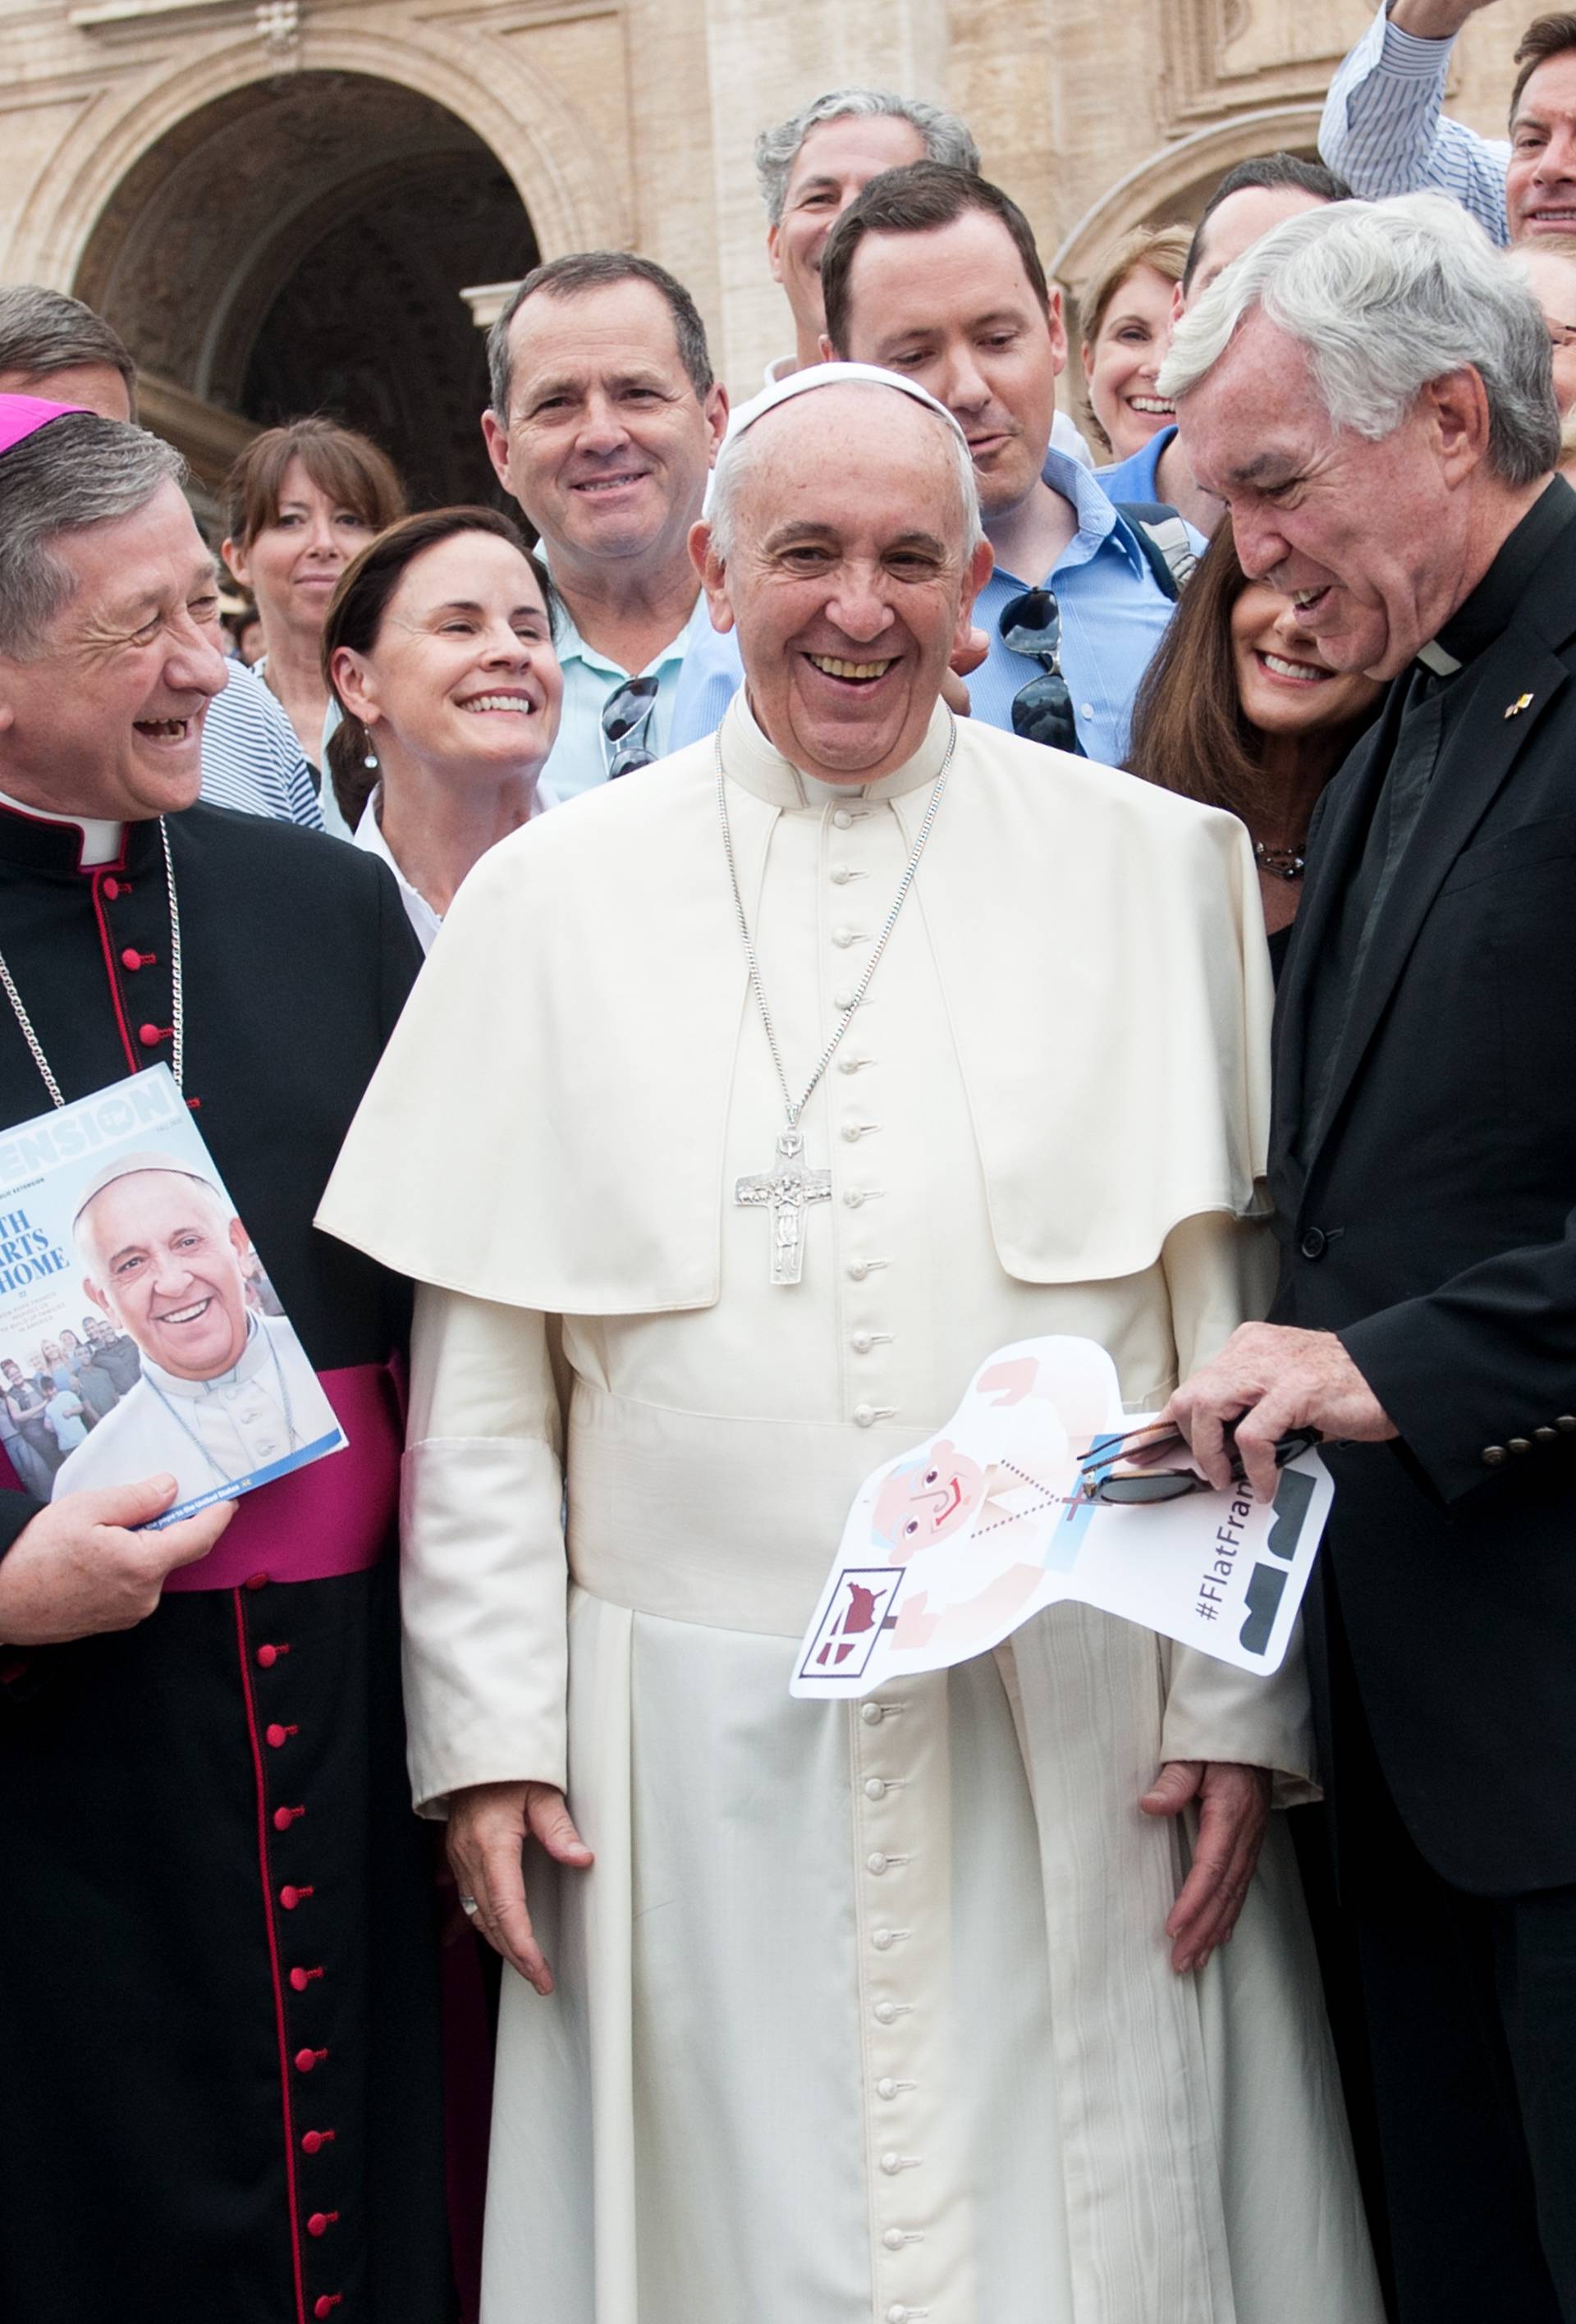 September 2, 2015: Weekly general audience in St. Peter's Square at the Vatican.